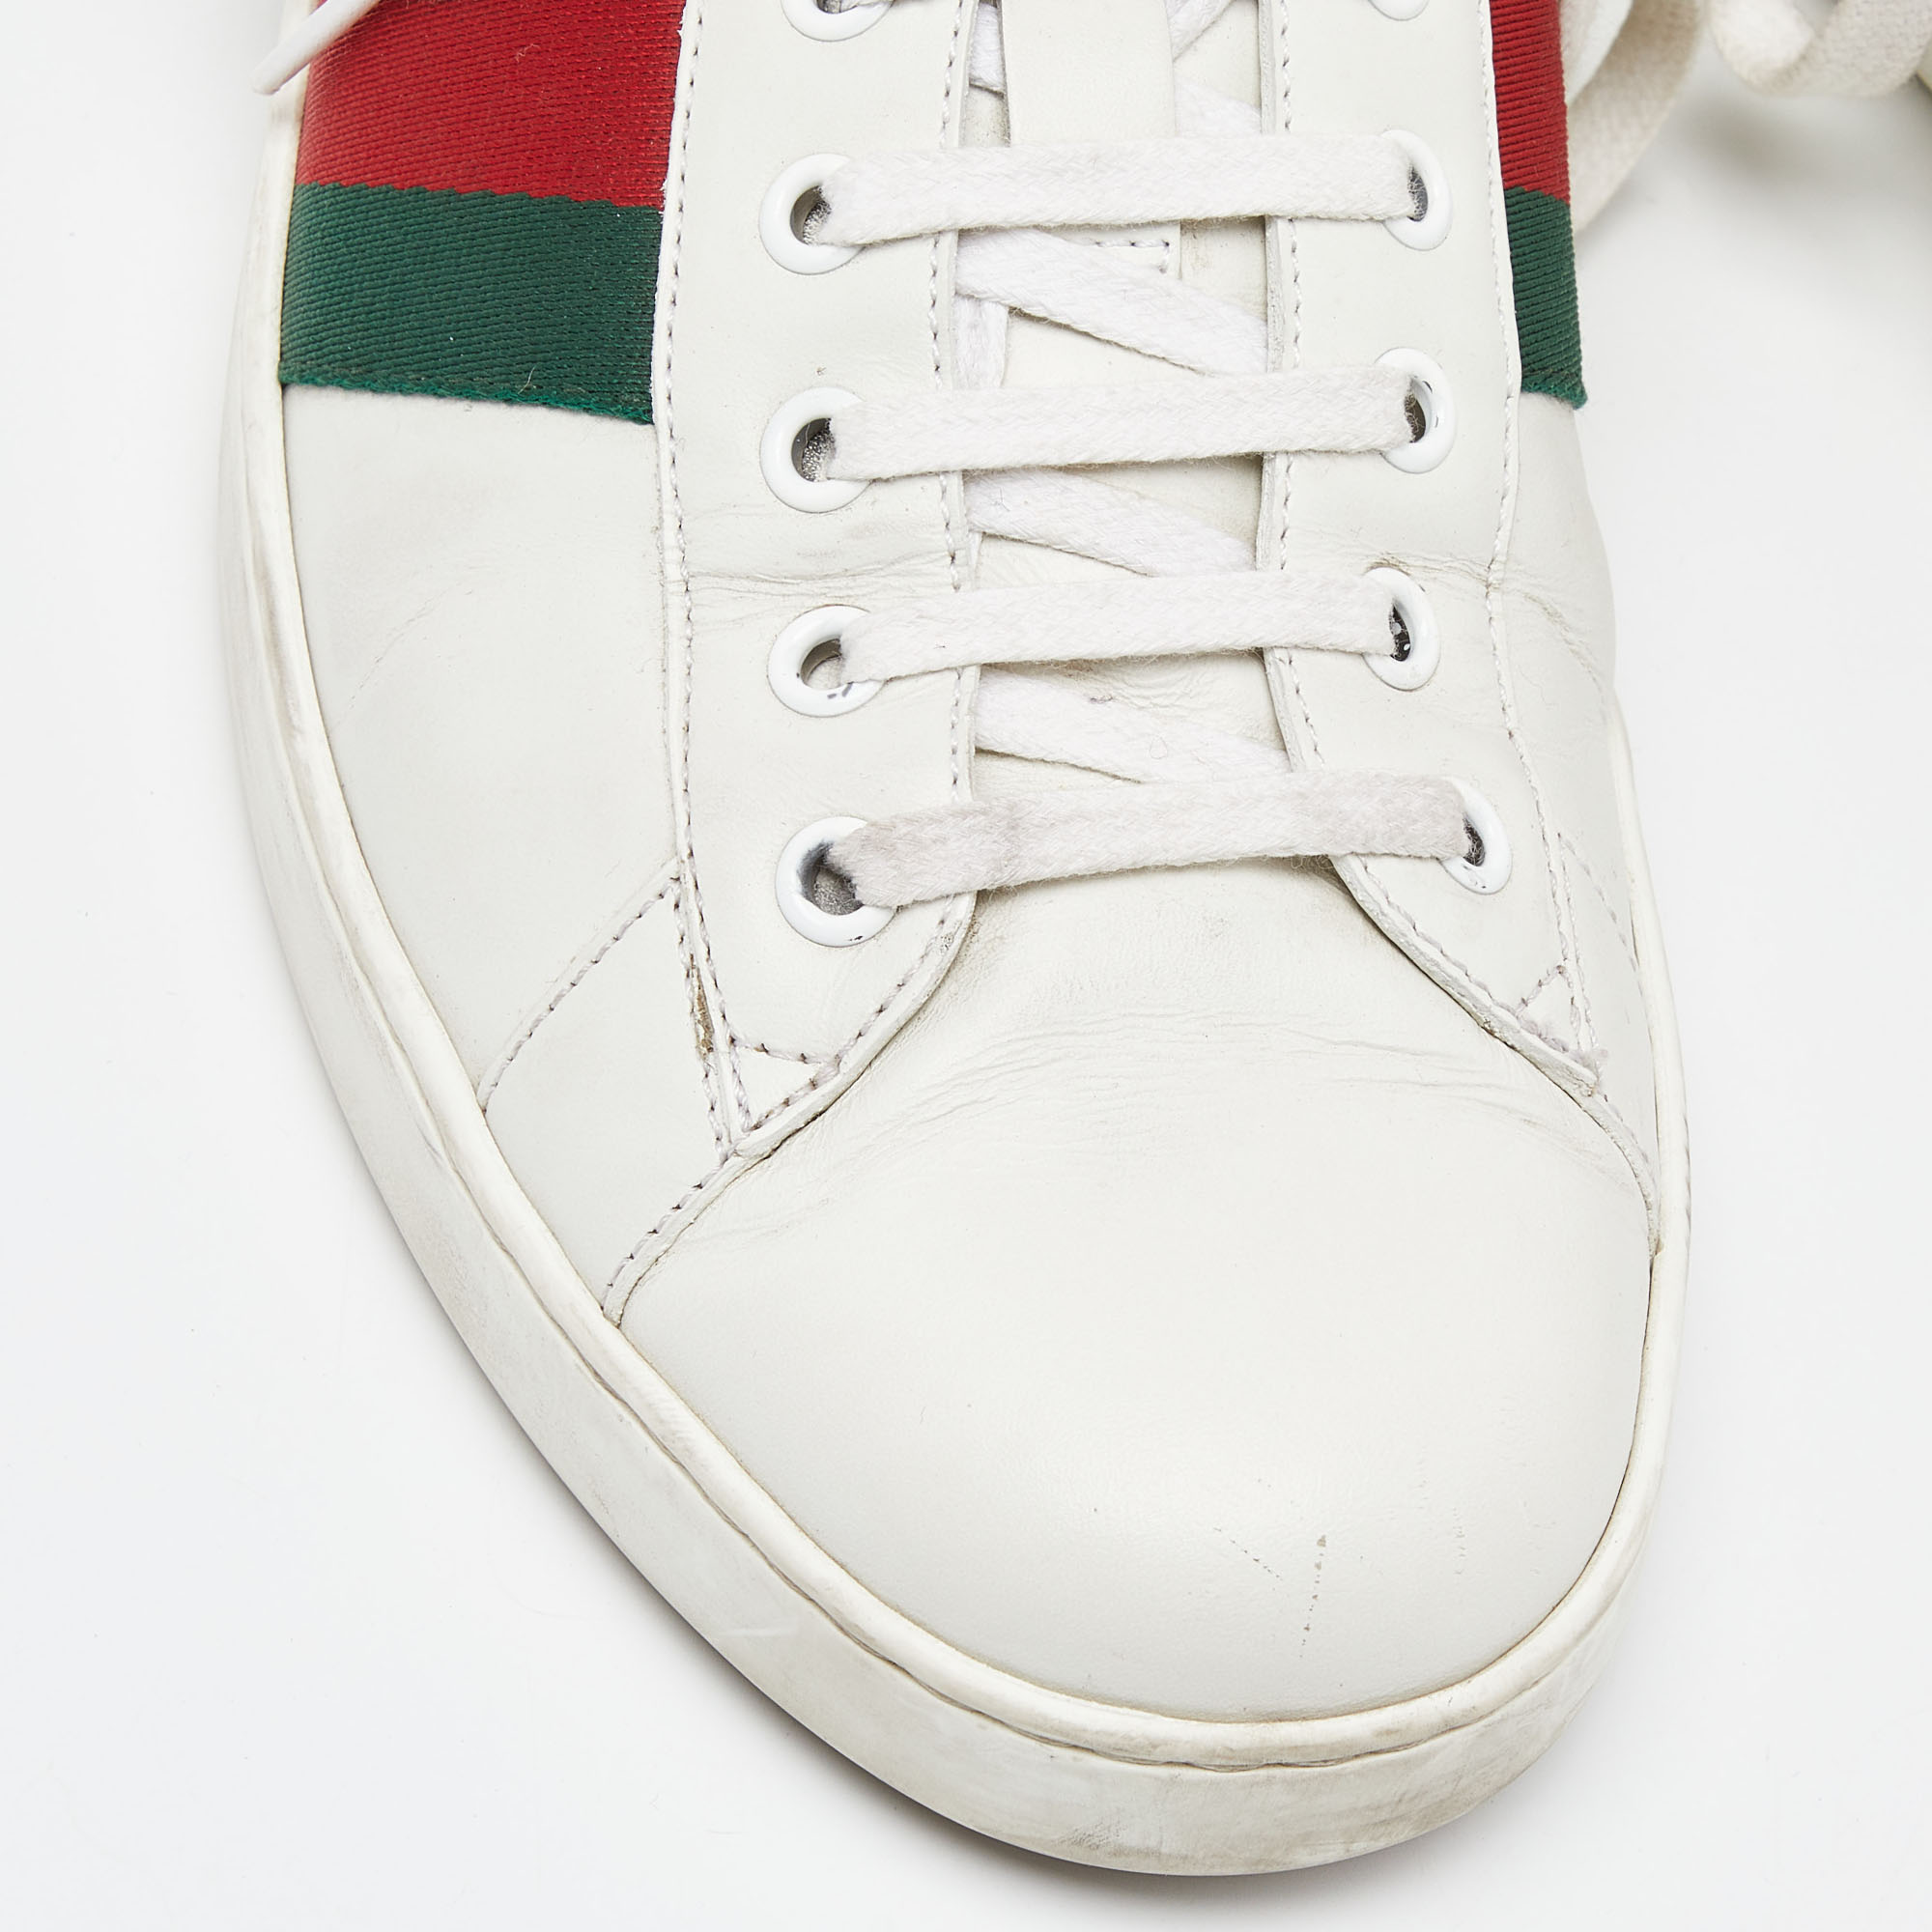 Gucci White Leather Ace Low Top Sneakers Size 44